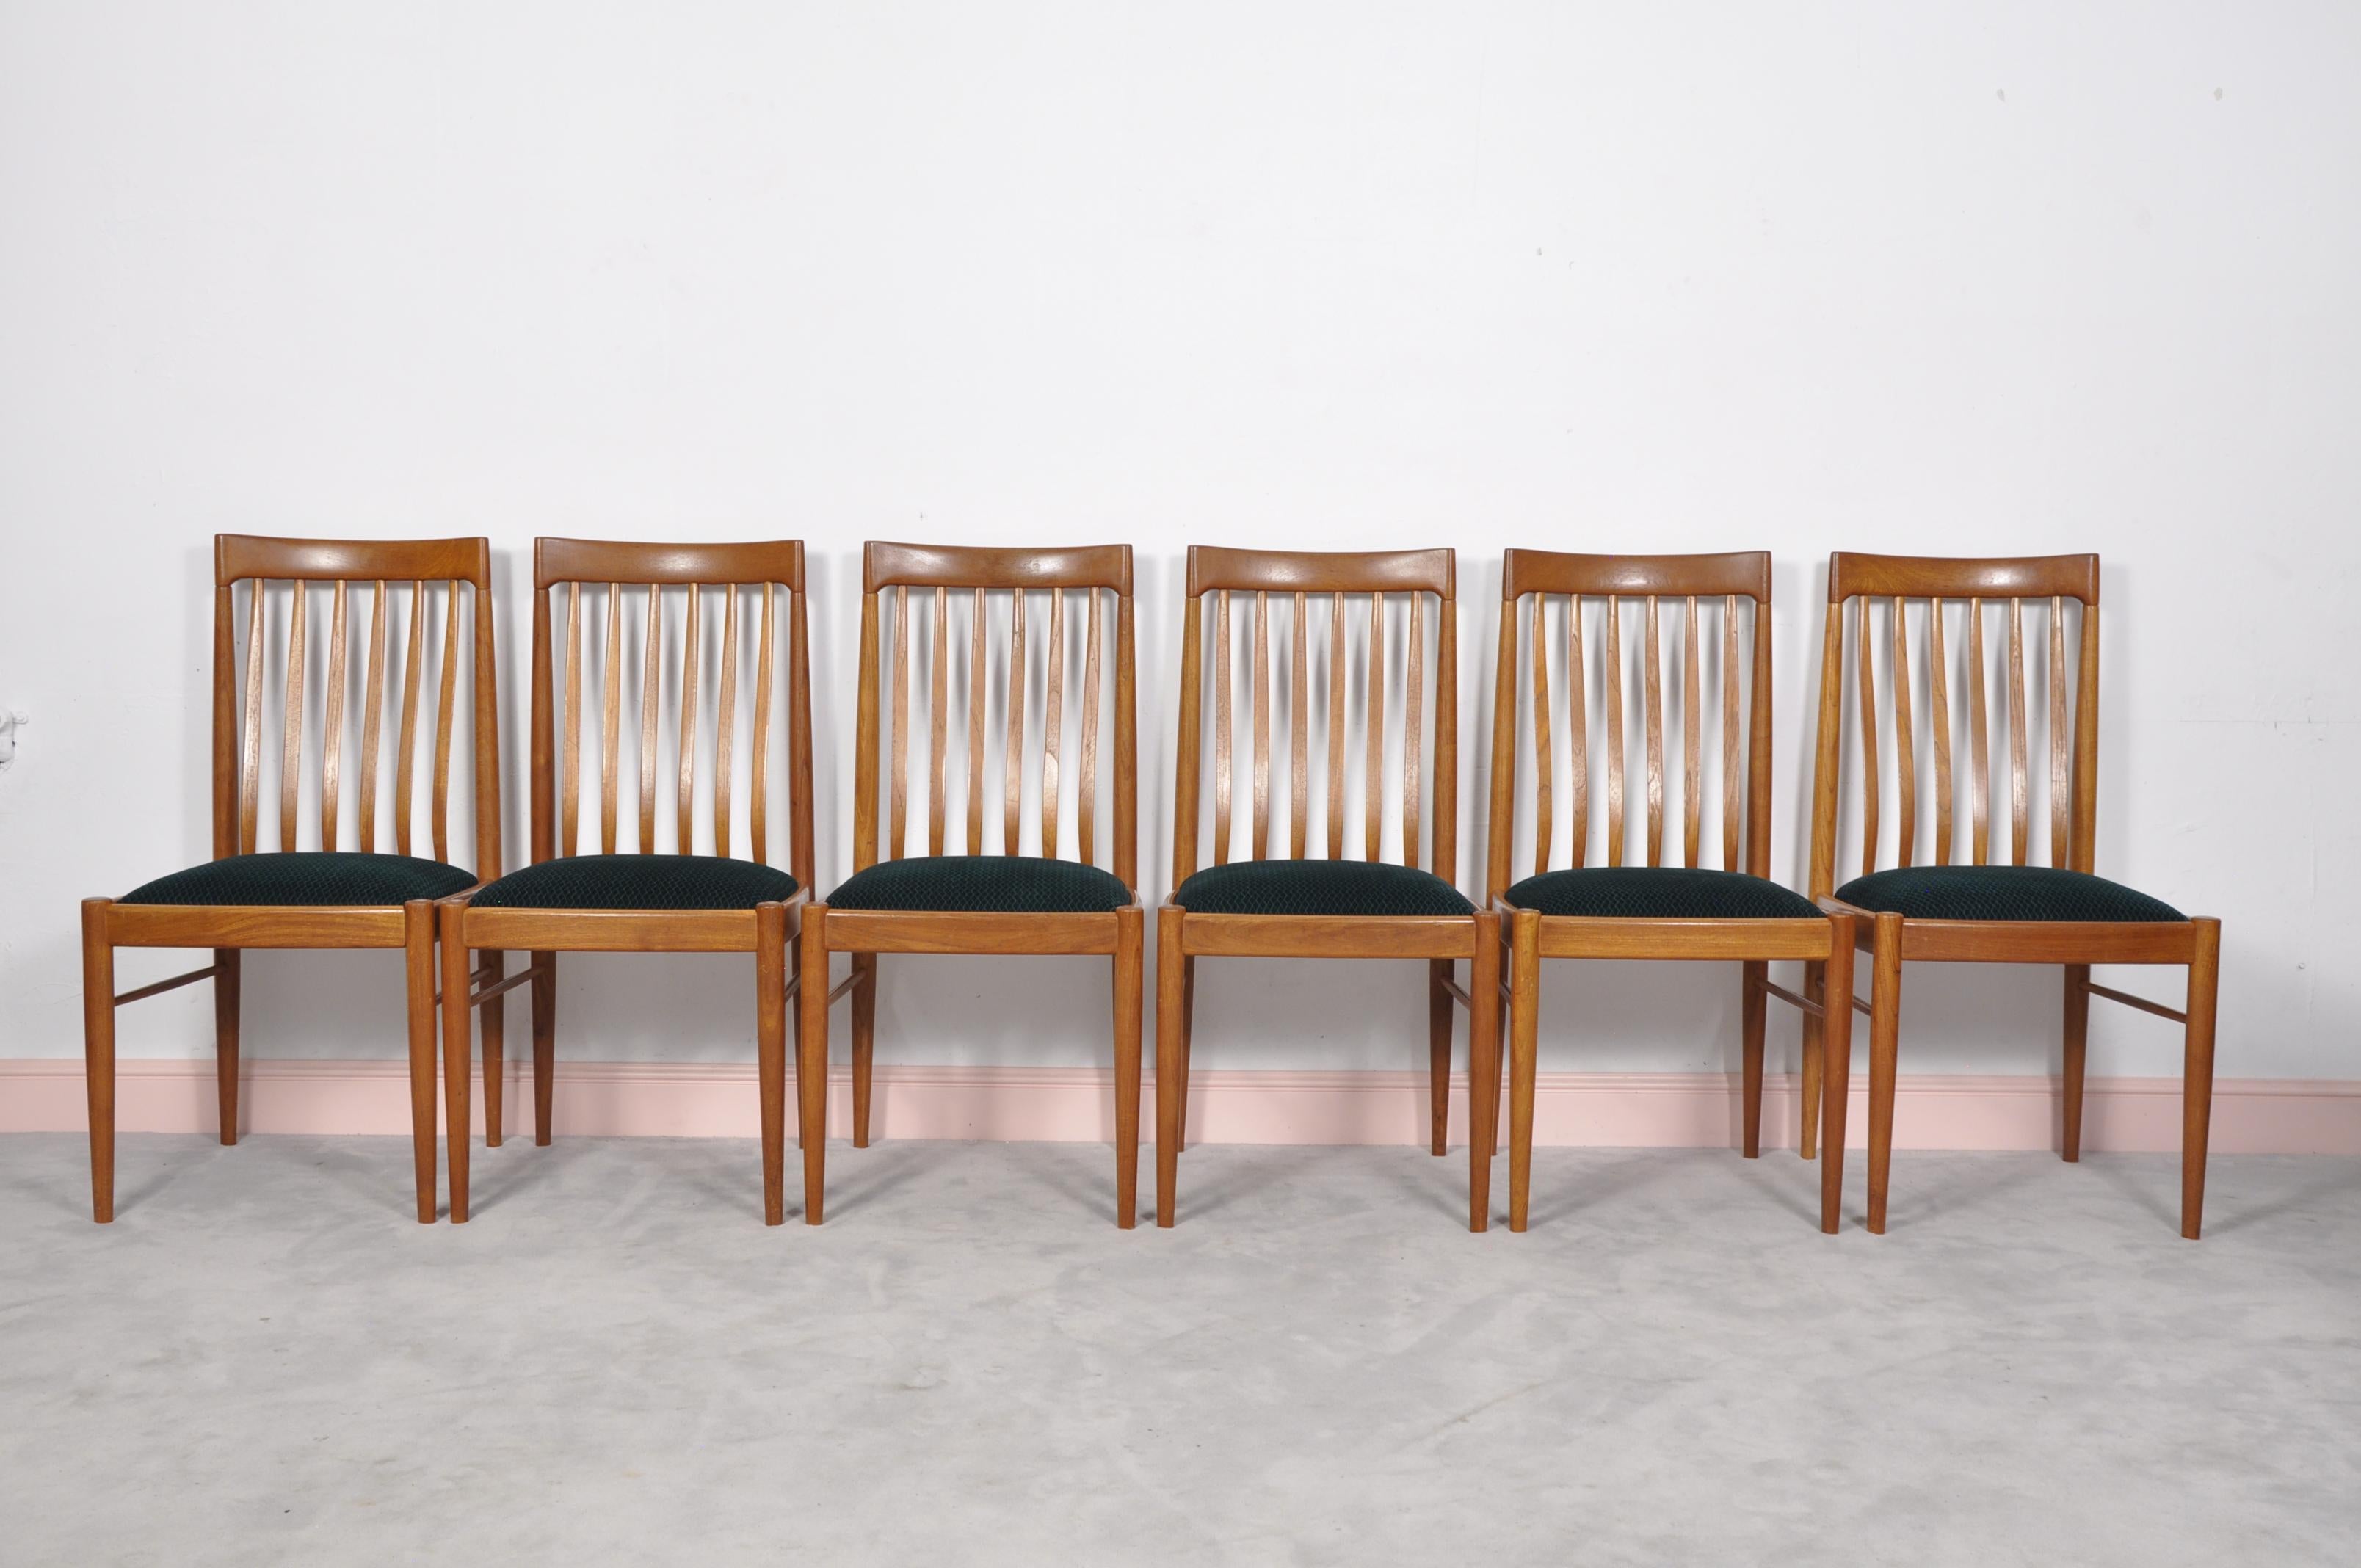 A superb set of six Danish dining chairs, in solid Teak, made by Bramin and designed by H. Klein. They date from circa 1960s-1970s, and the condition is excellent for their age. The drop in seats have been newly re-upholstered in green velvet fabric.